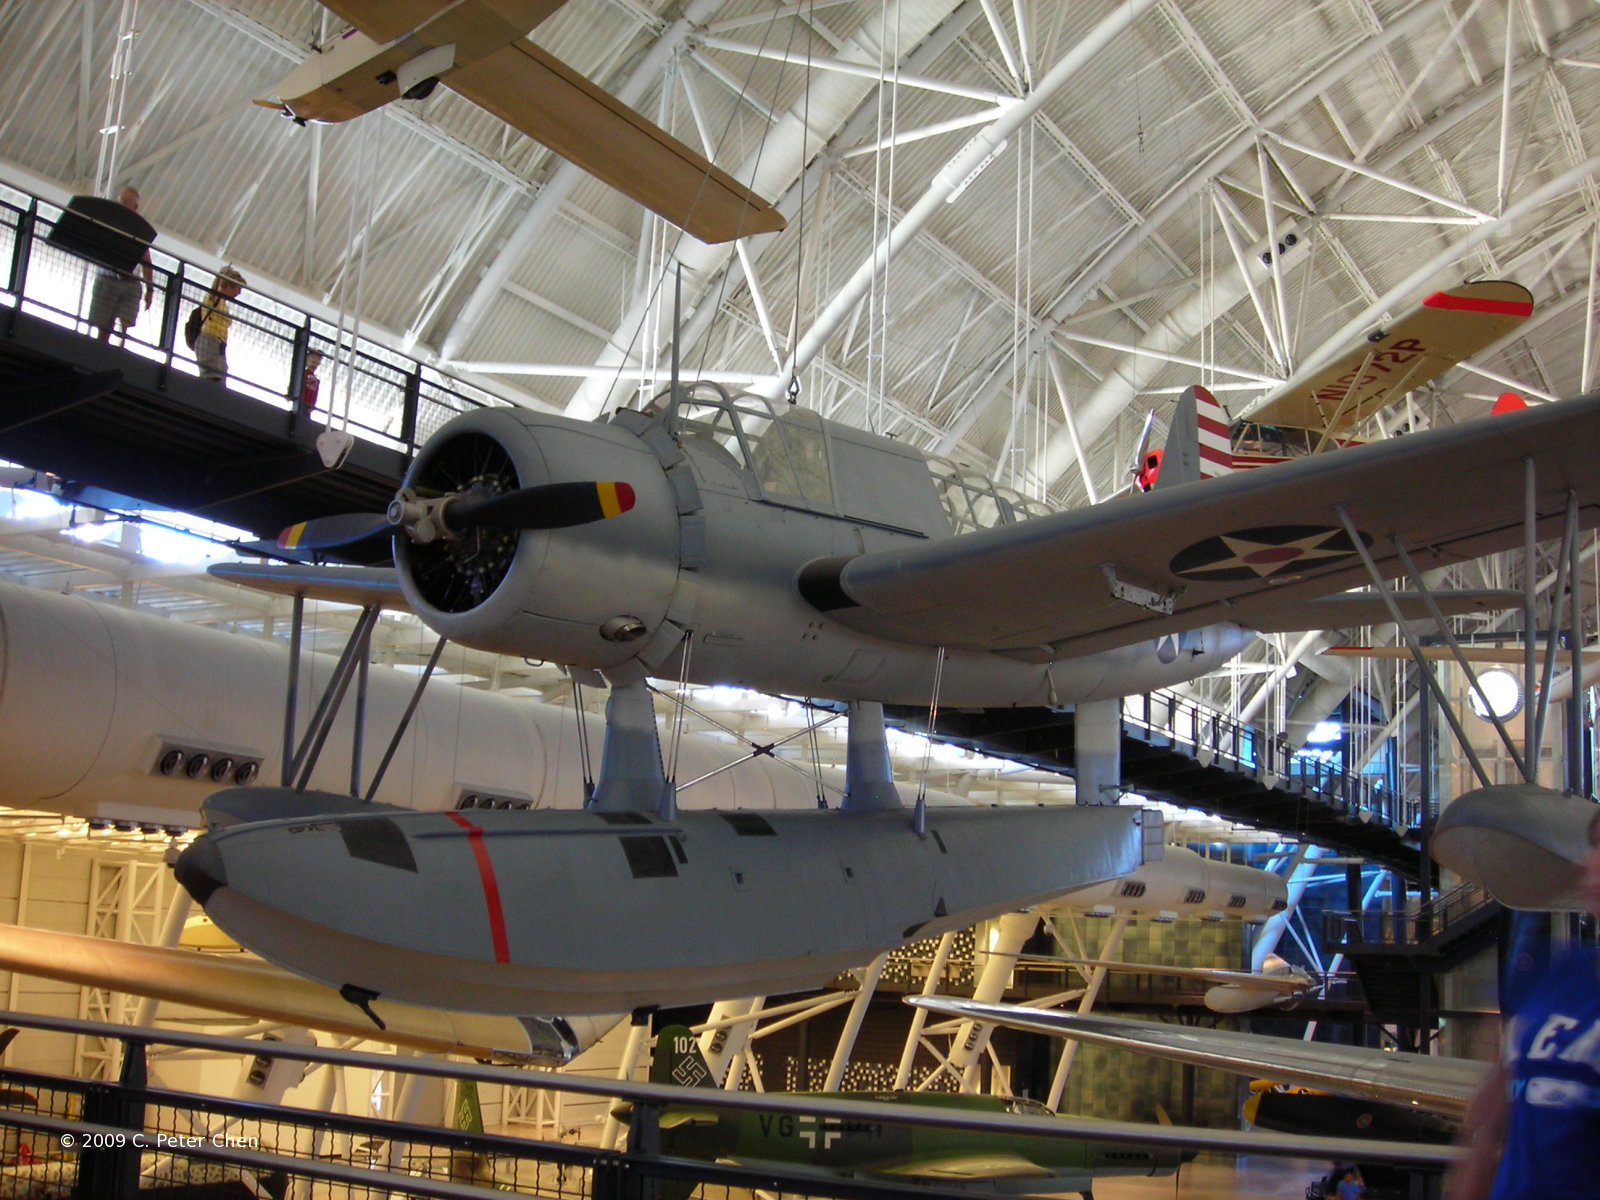 OS2U-3 Kingfisher aircraft on display at the Smithsonian Air and Space Museum Udvar-Hazy Center, Chantilly, Virginia, United States, 26 Apr 2009